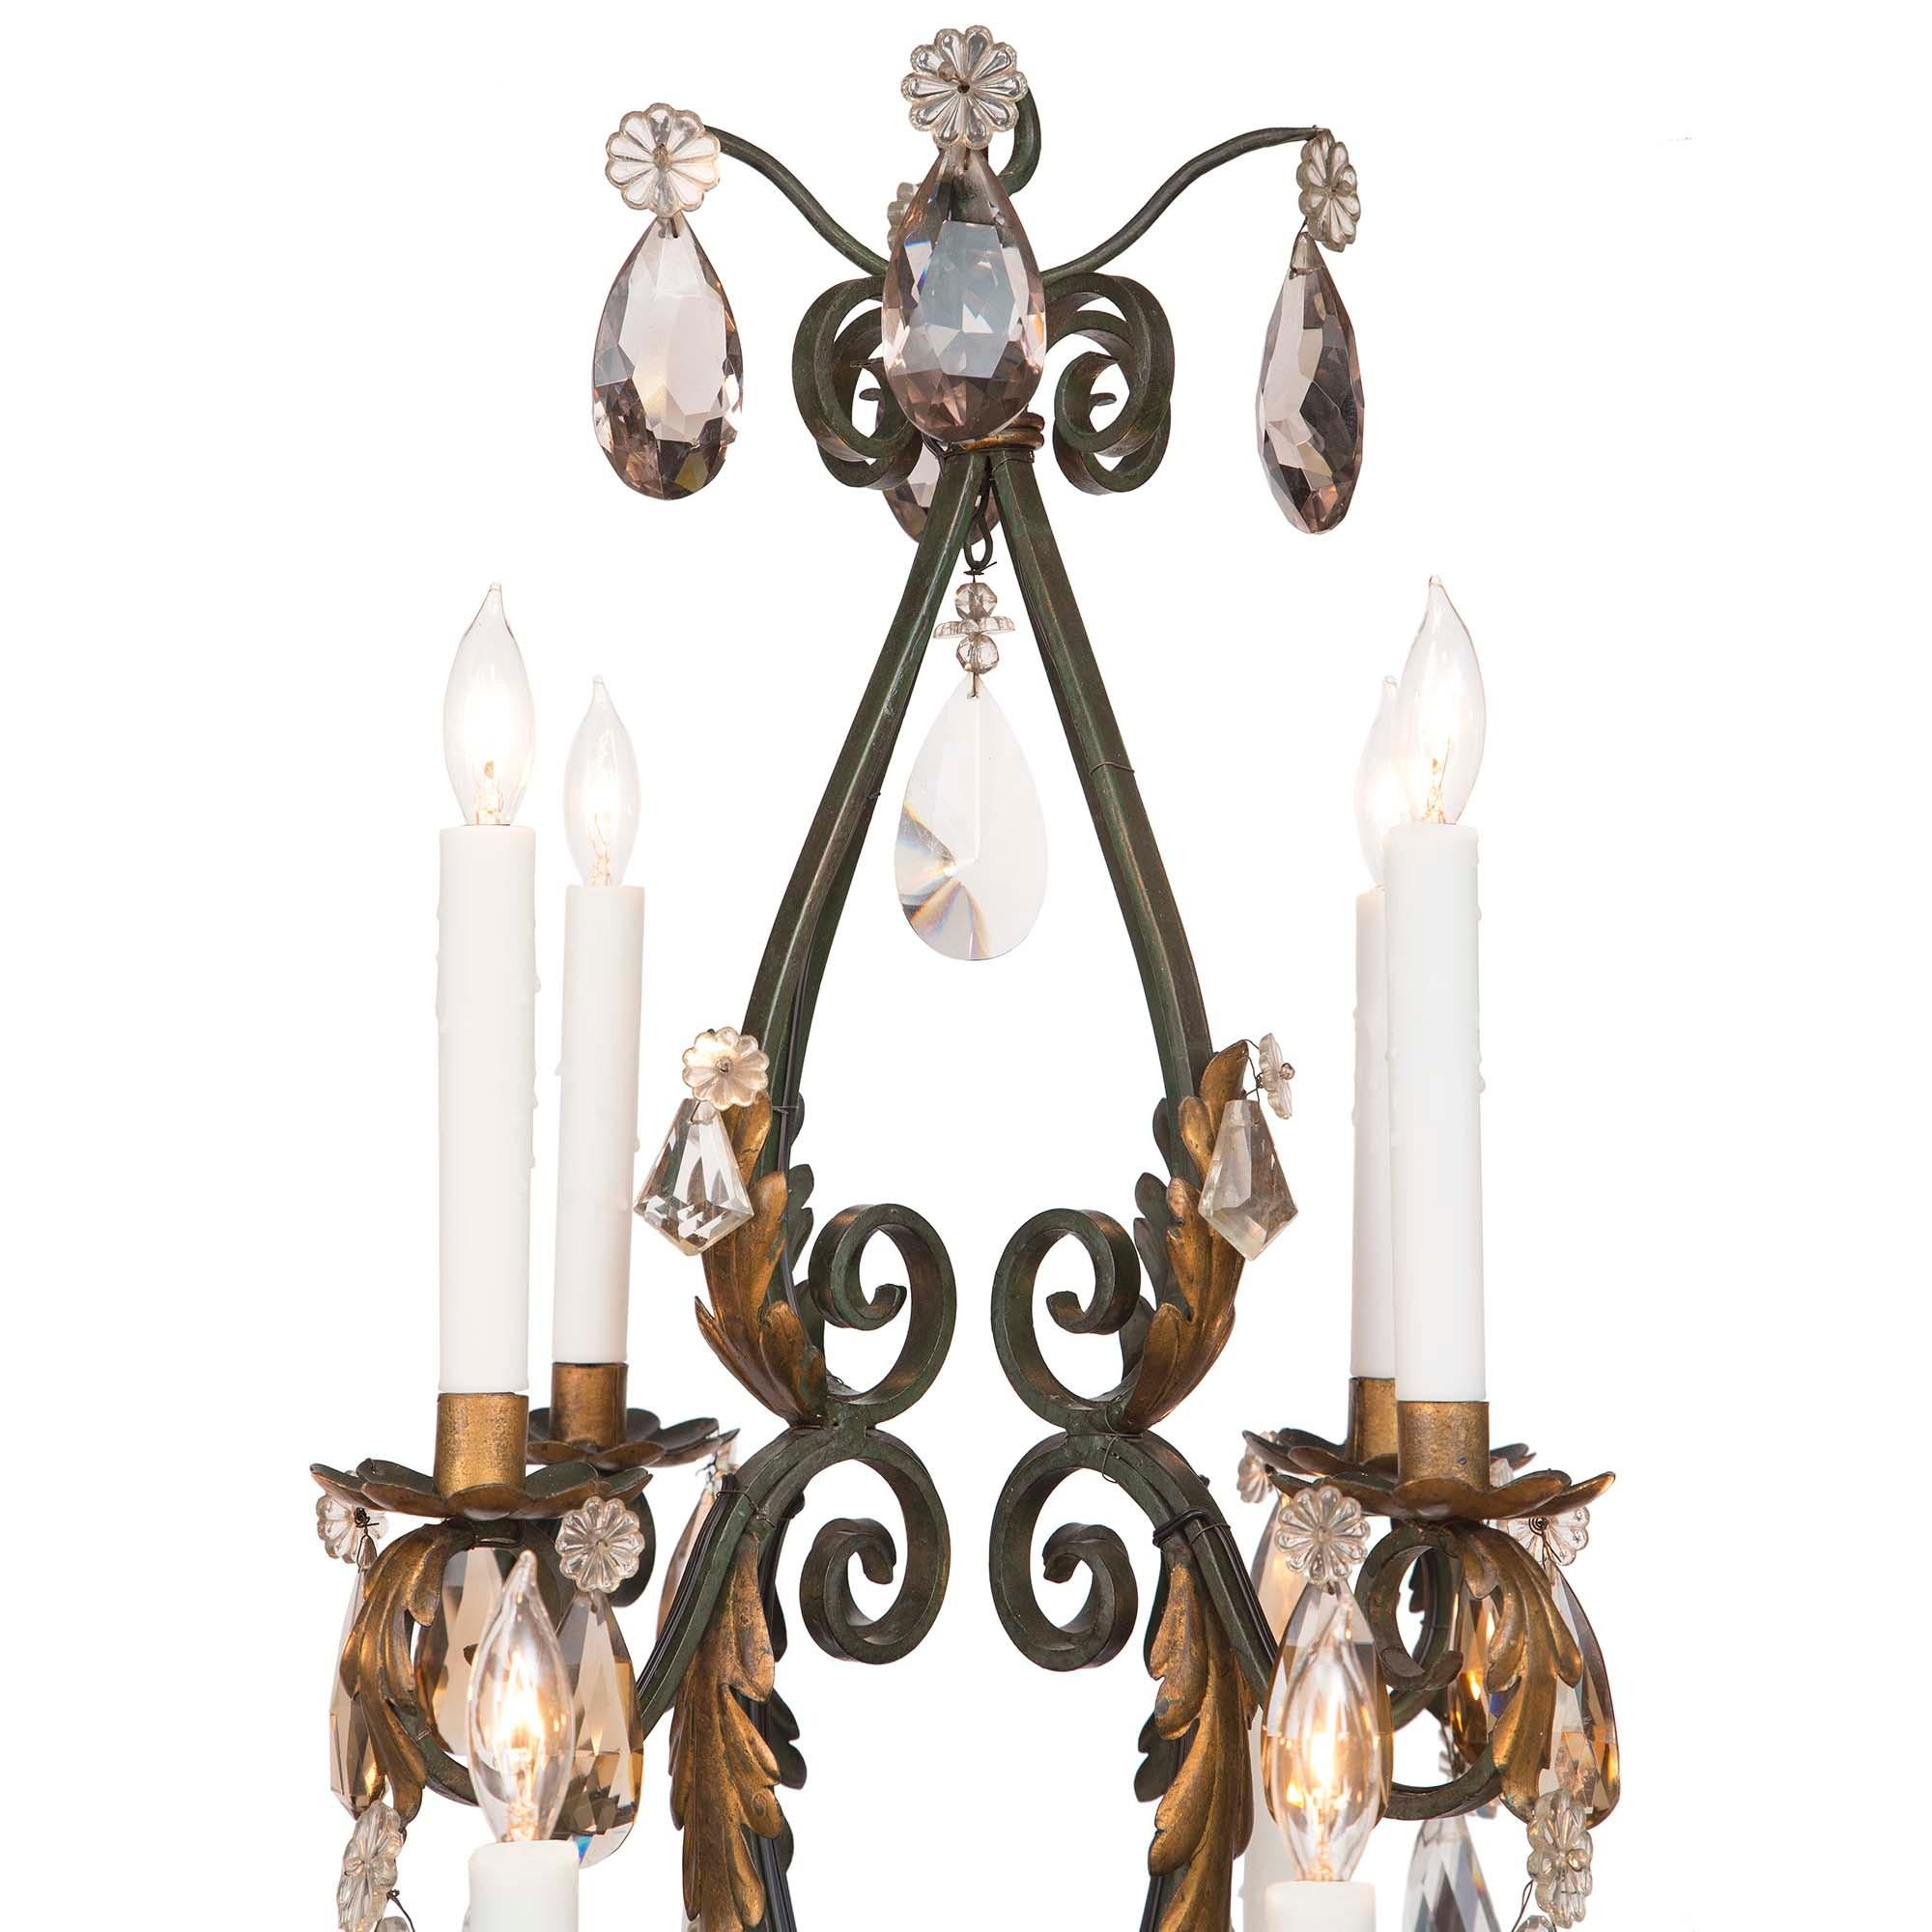 A country French 19th century wrought iron, gilt metal and Baccarat crystal chandelier. At the center bottom is a wonderful crystal cluster of amethyst crystals designed to look like a grape cluster. The chandelier with a wonderful scrolled open